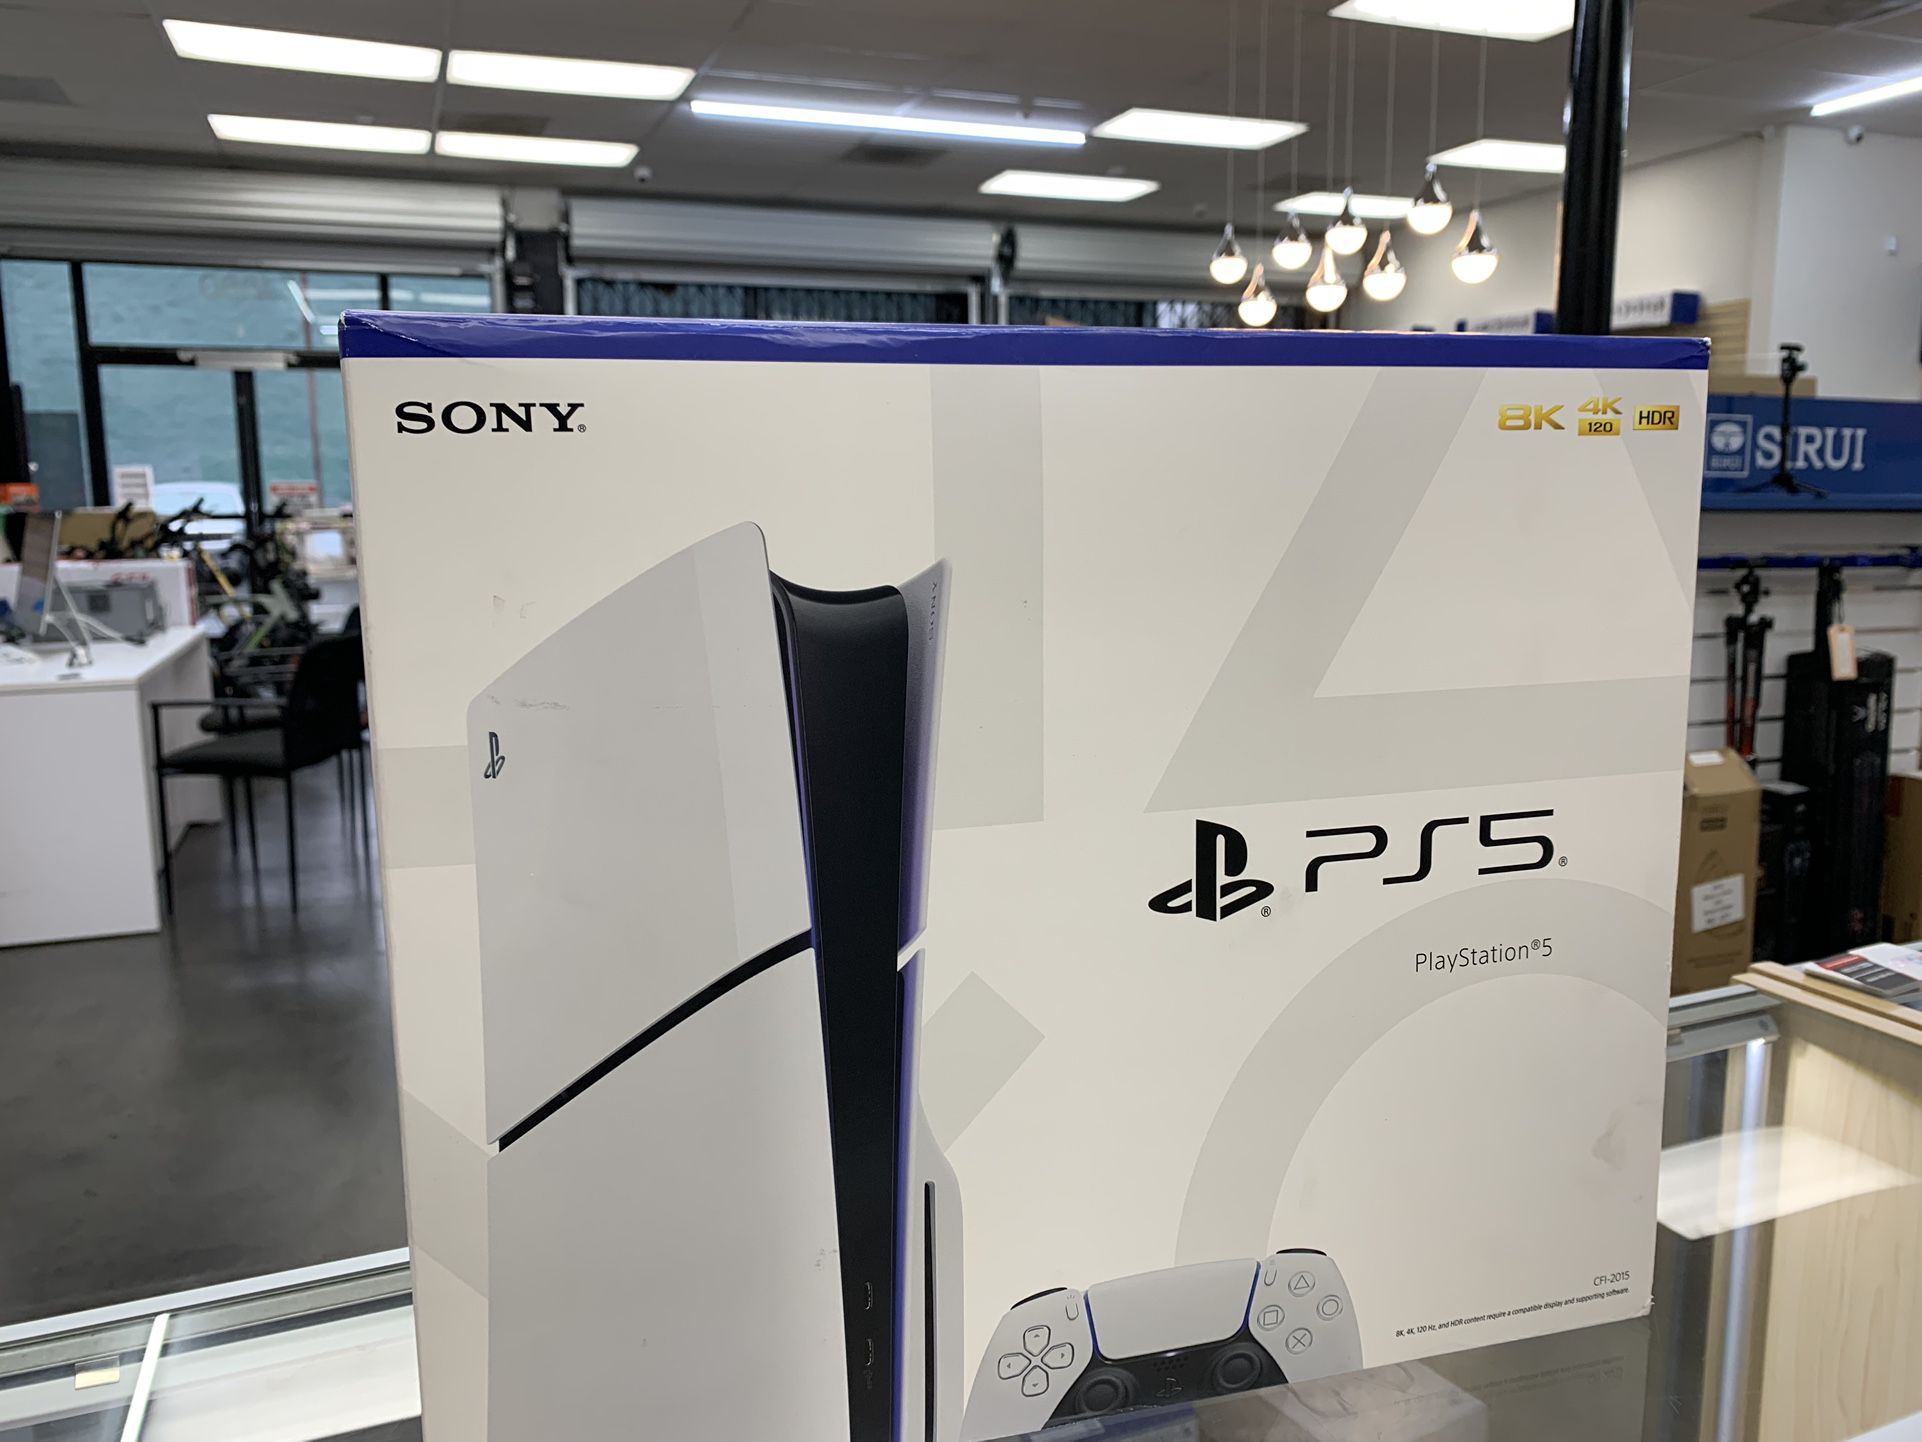 PlayStation 5. Disc Edition. Only $50 To Take It Today